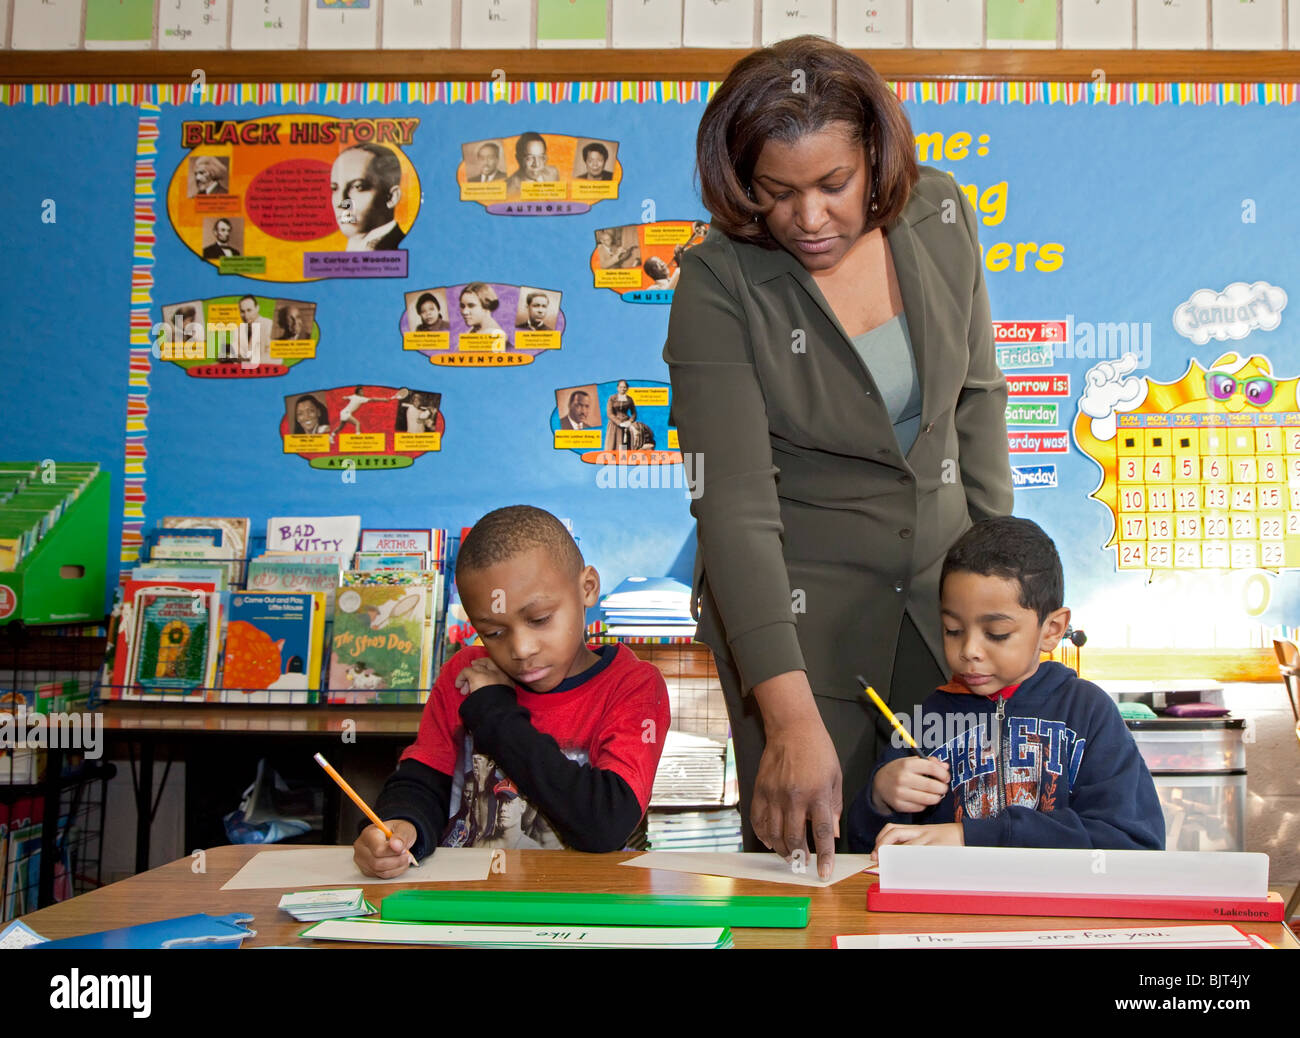 Detroit, Michigan - First grade teacher Ivy Bailey helps two students at MacDowell Elementary School. Stock Photo